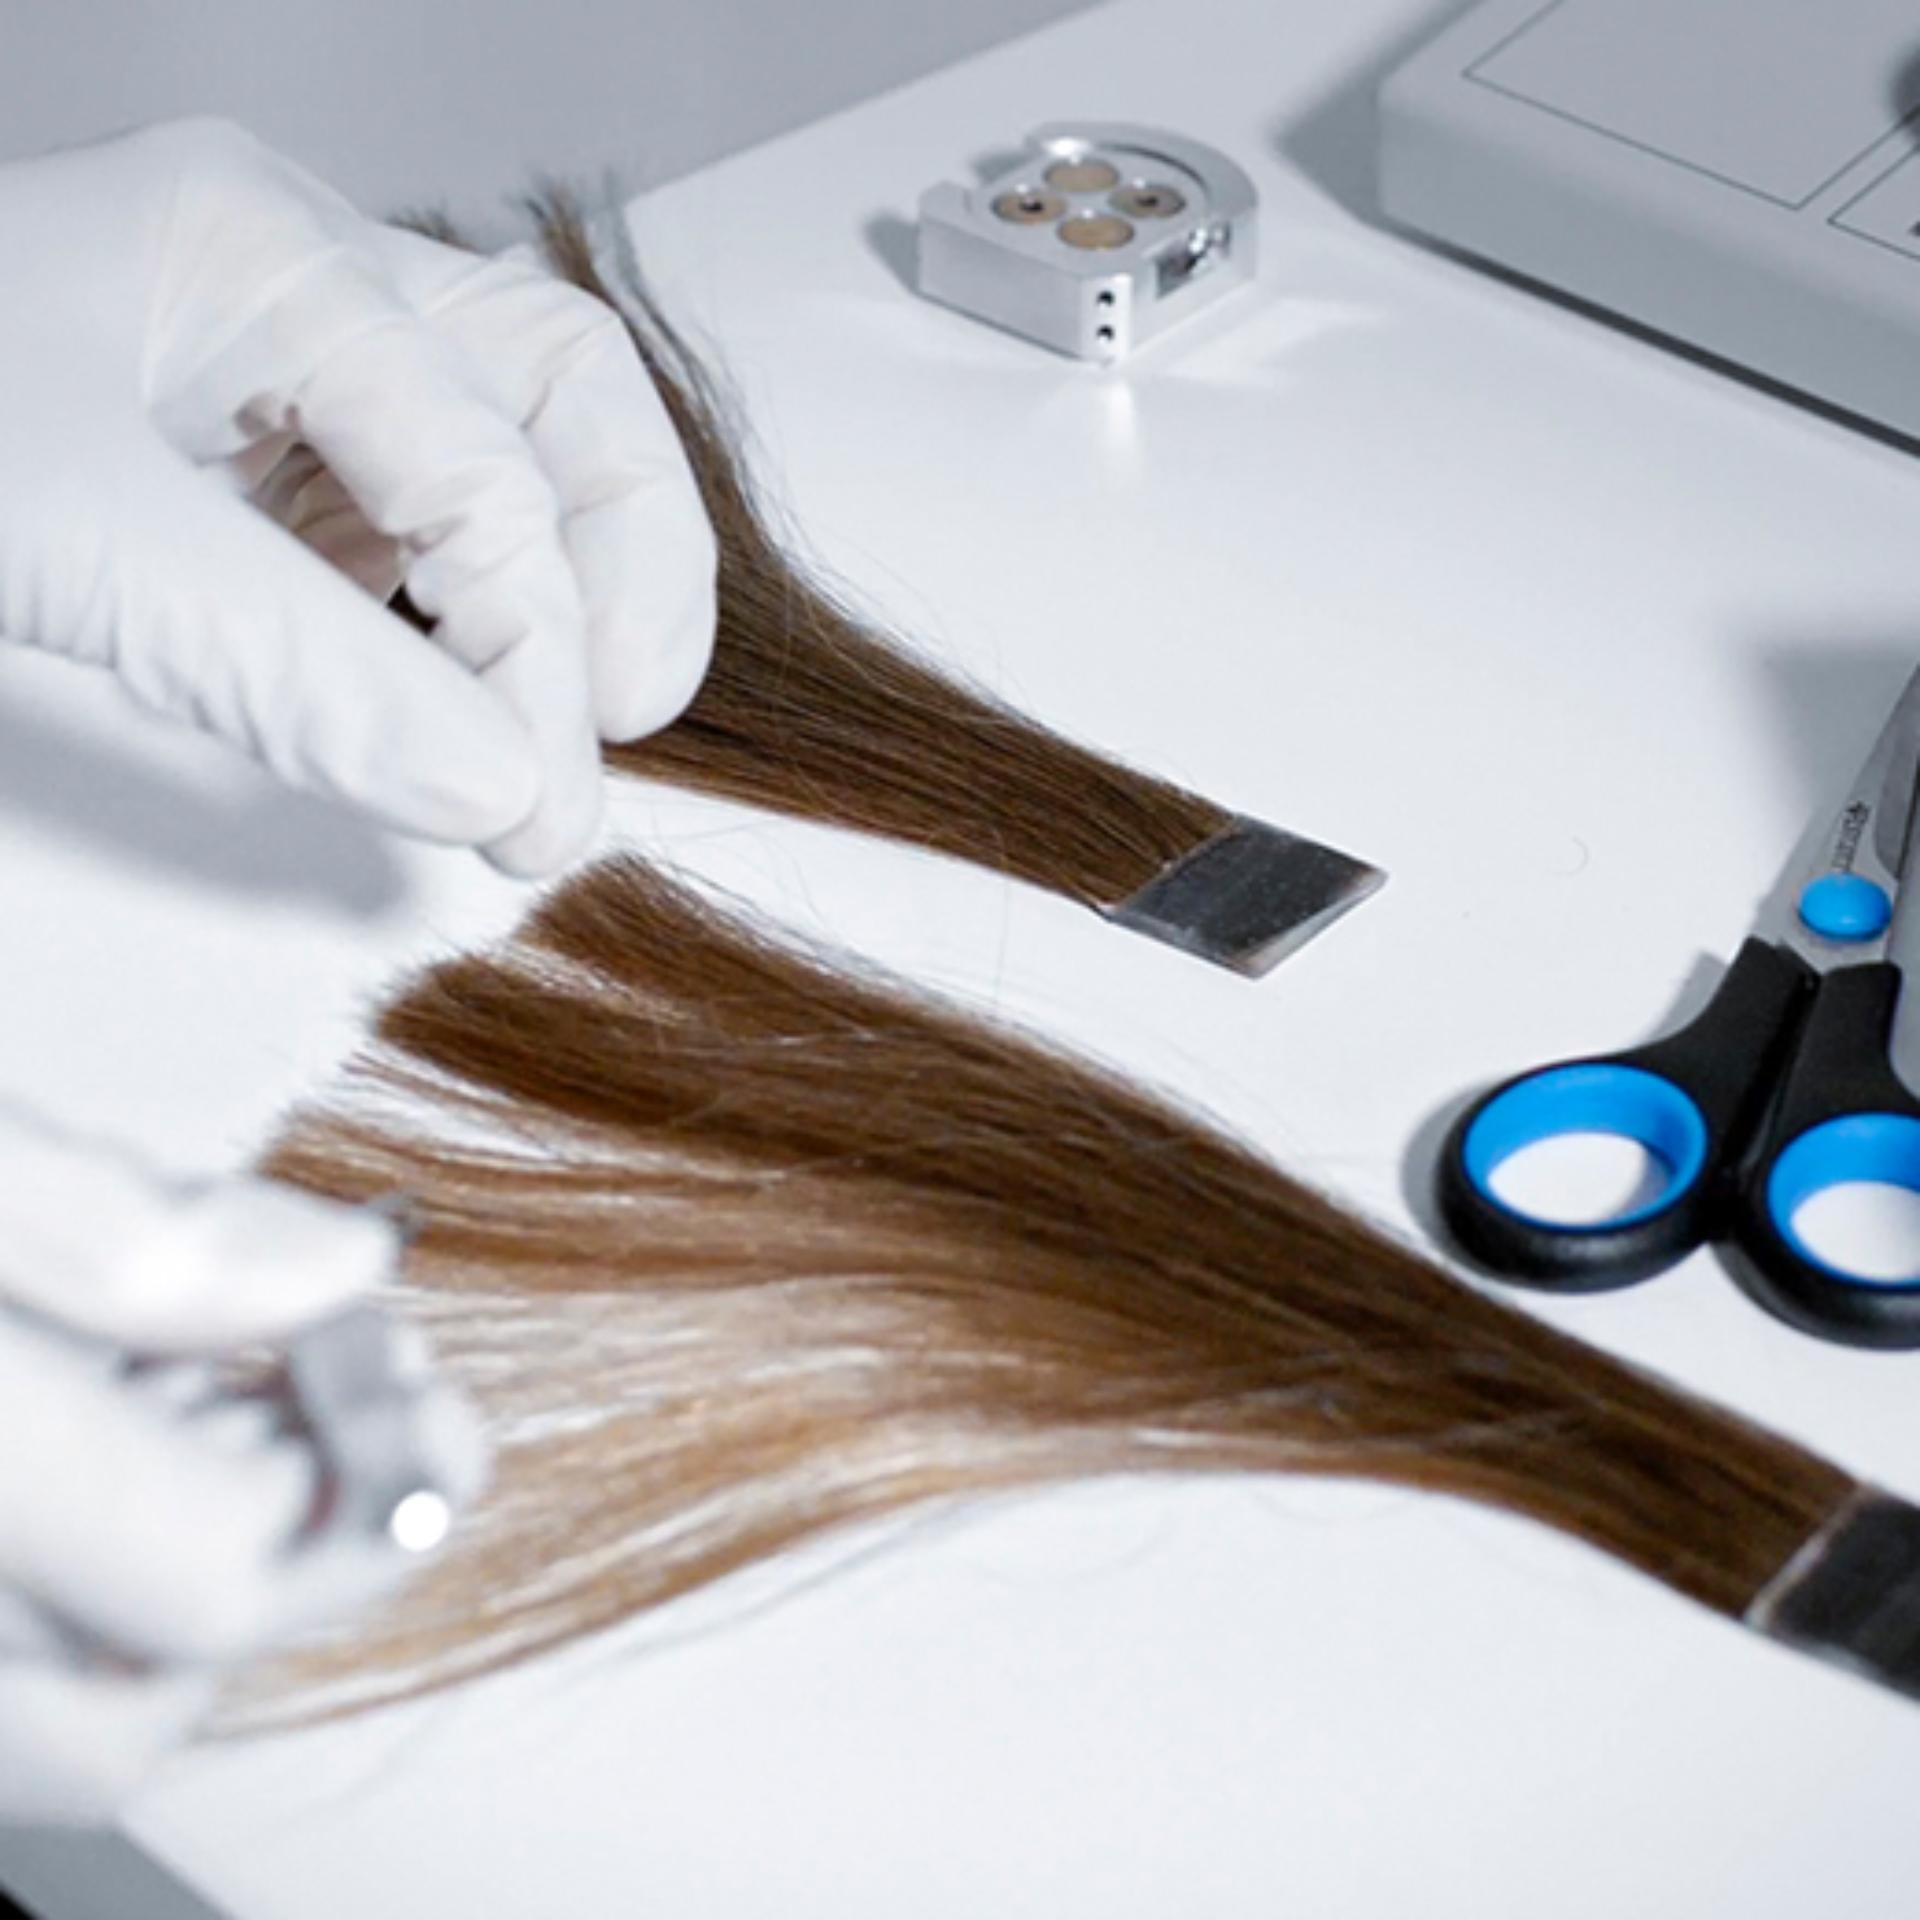 Real hair being tested in laboratory.